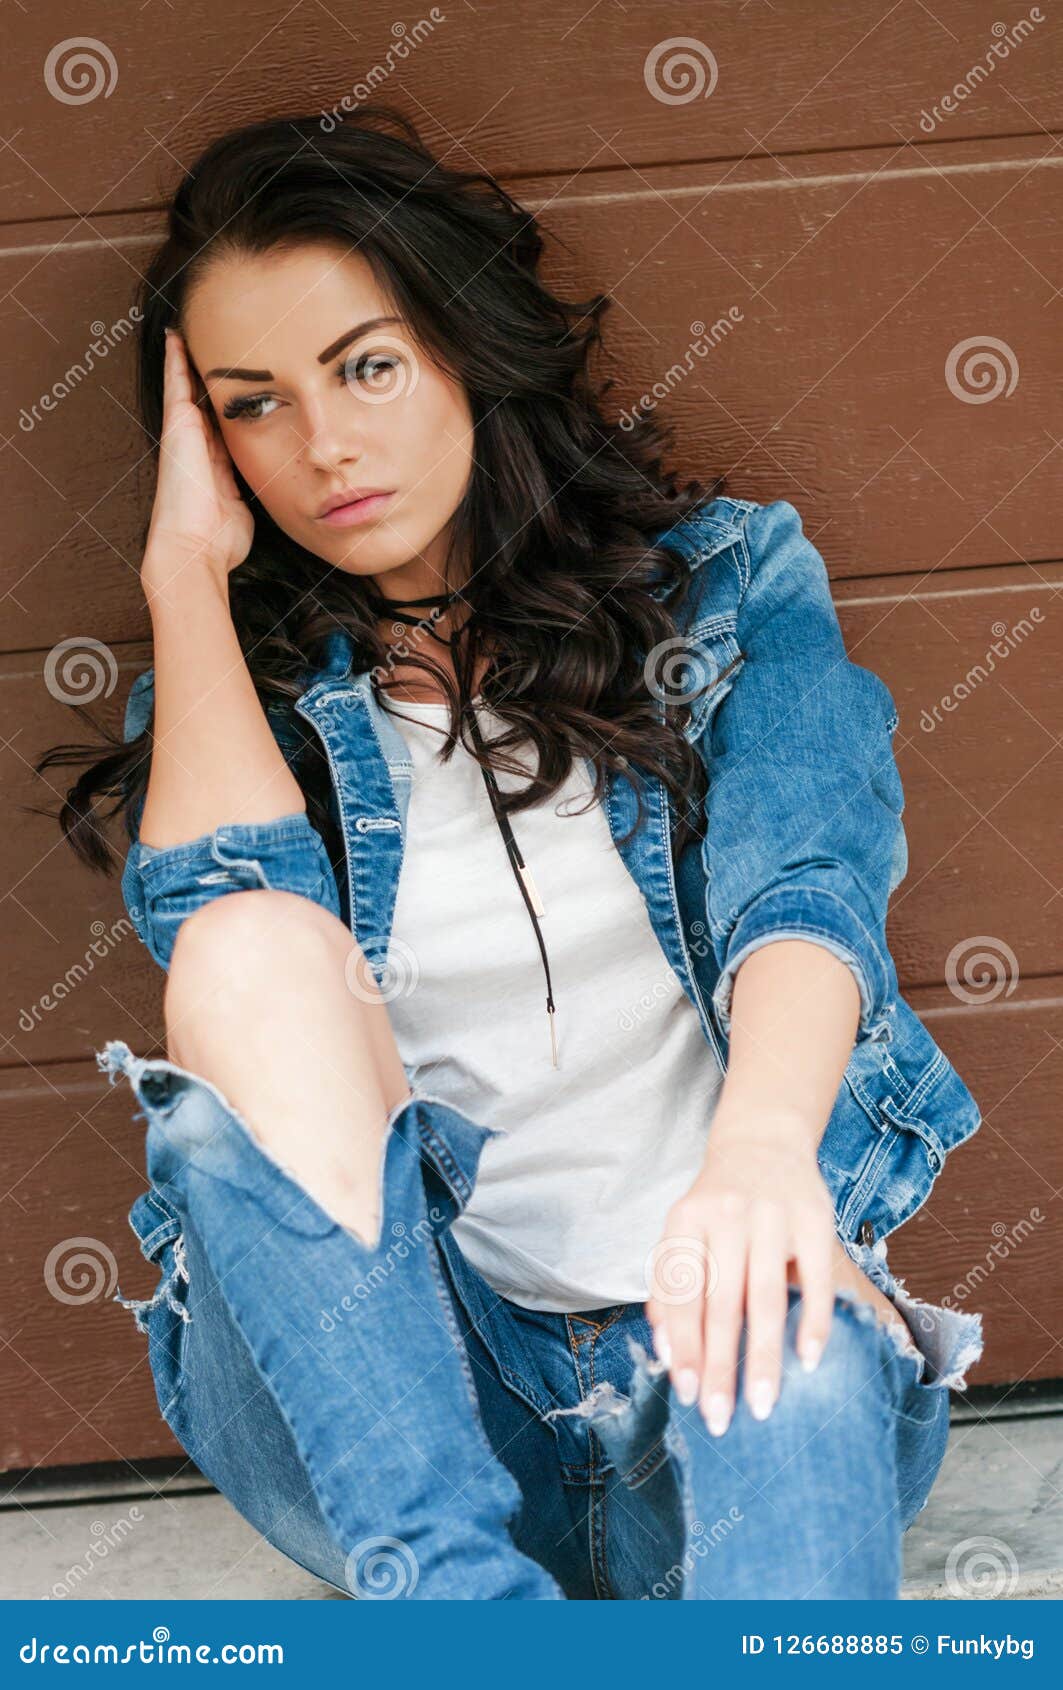 Woman with Brown Hair in Denim Jacket Posing on Camera Stock Image ...